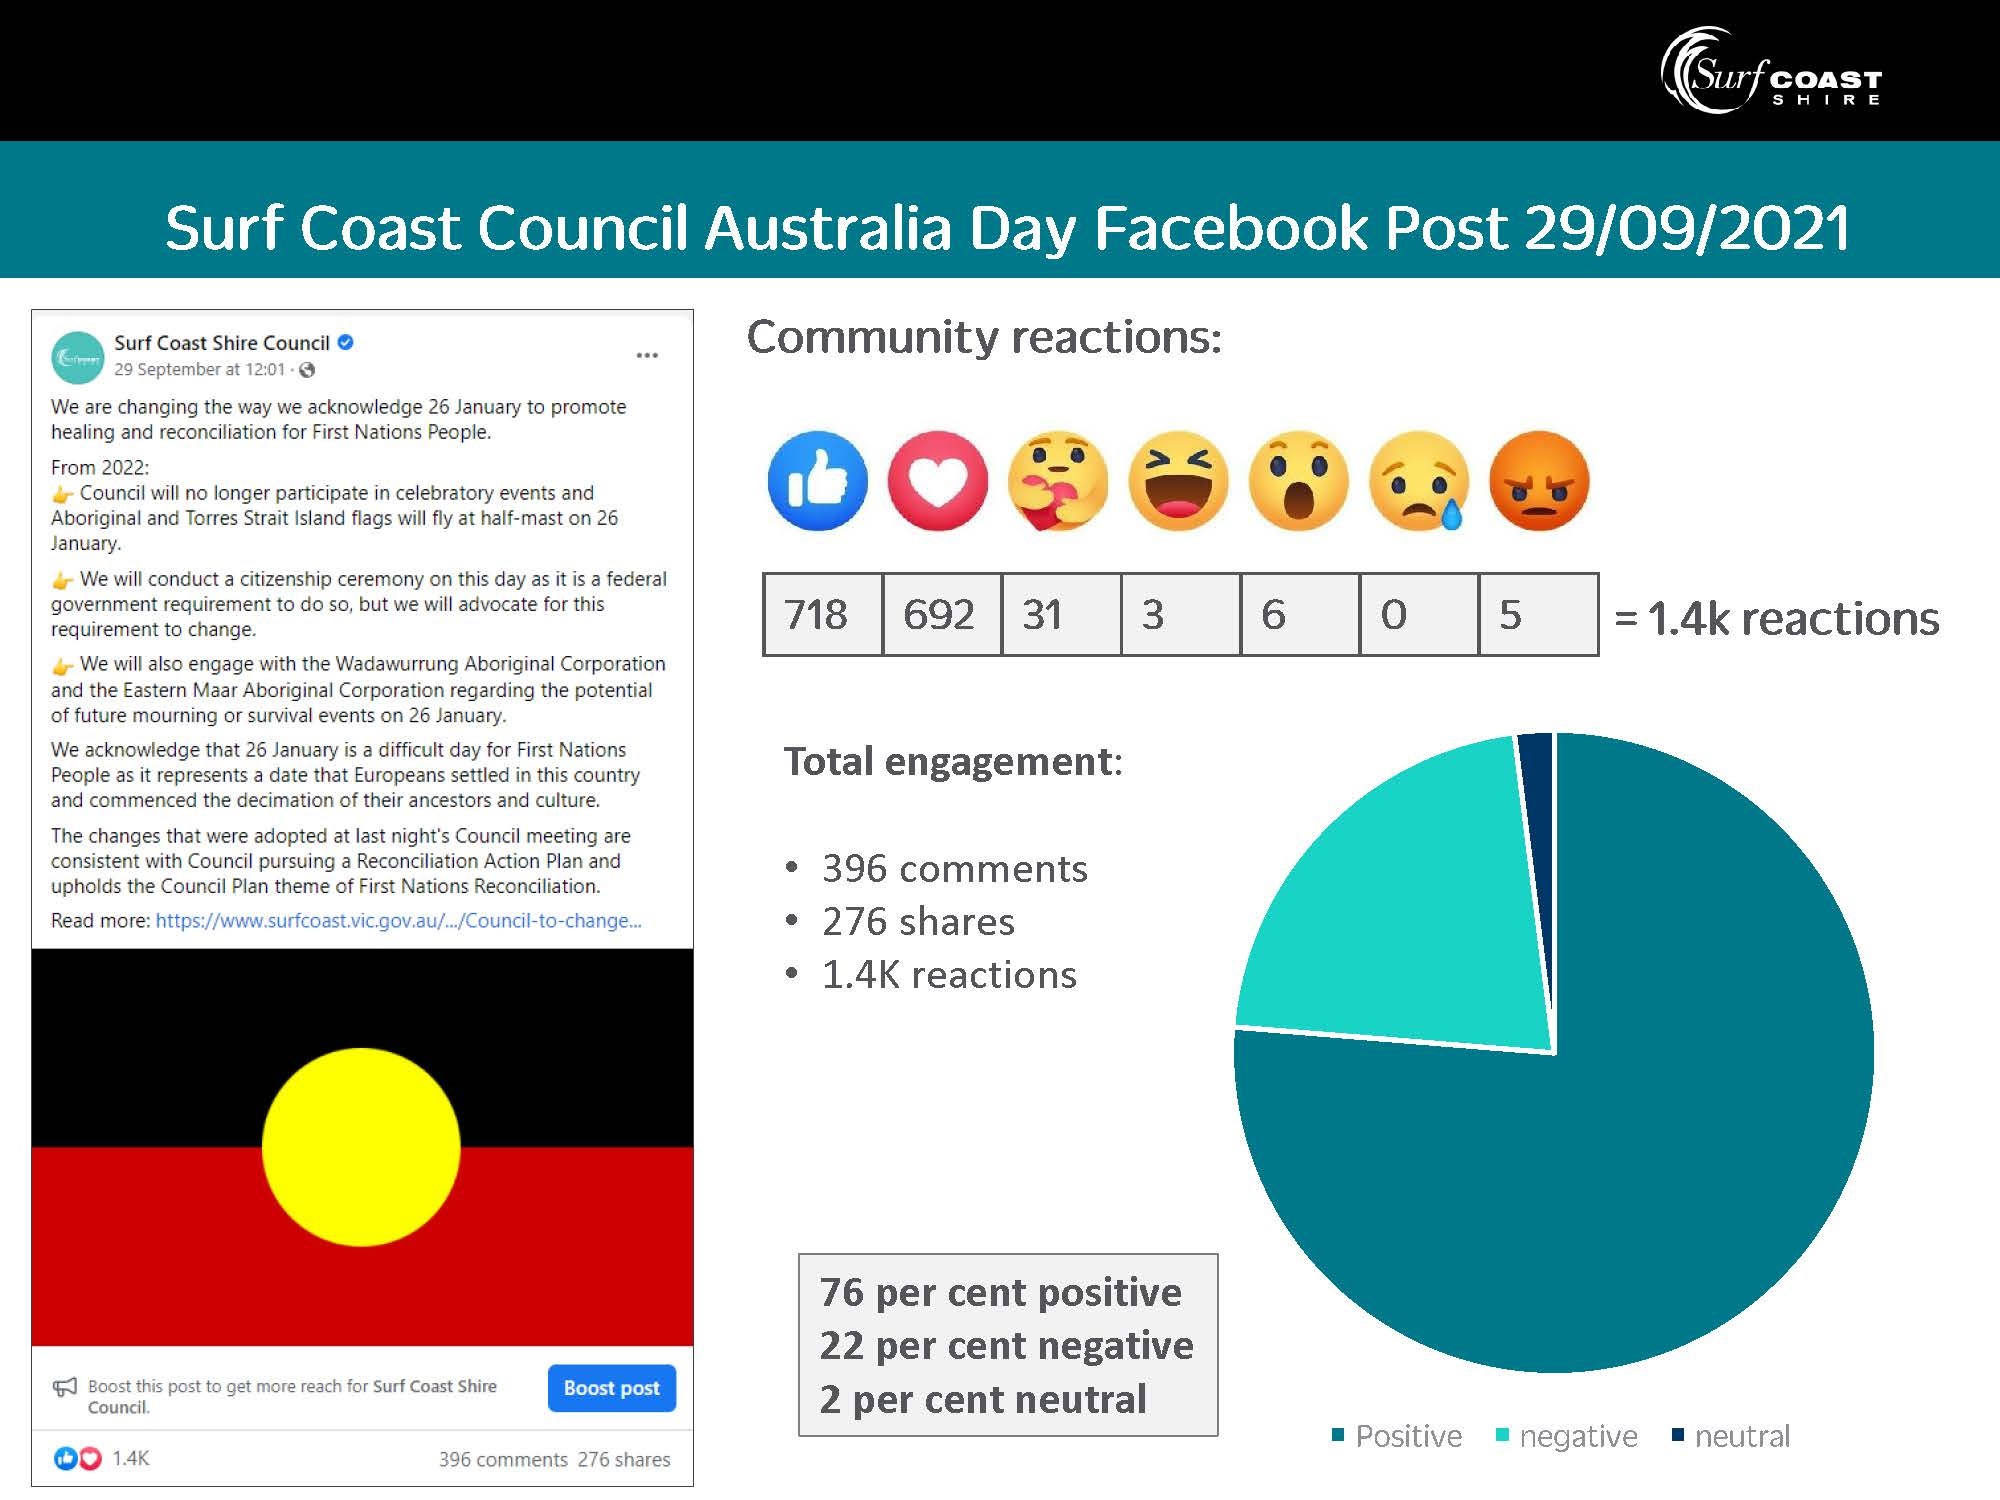 Summary of reactions to and sentiment towards Council's Facebook post about the decision.